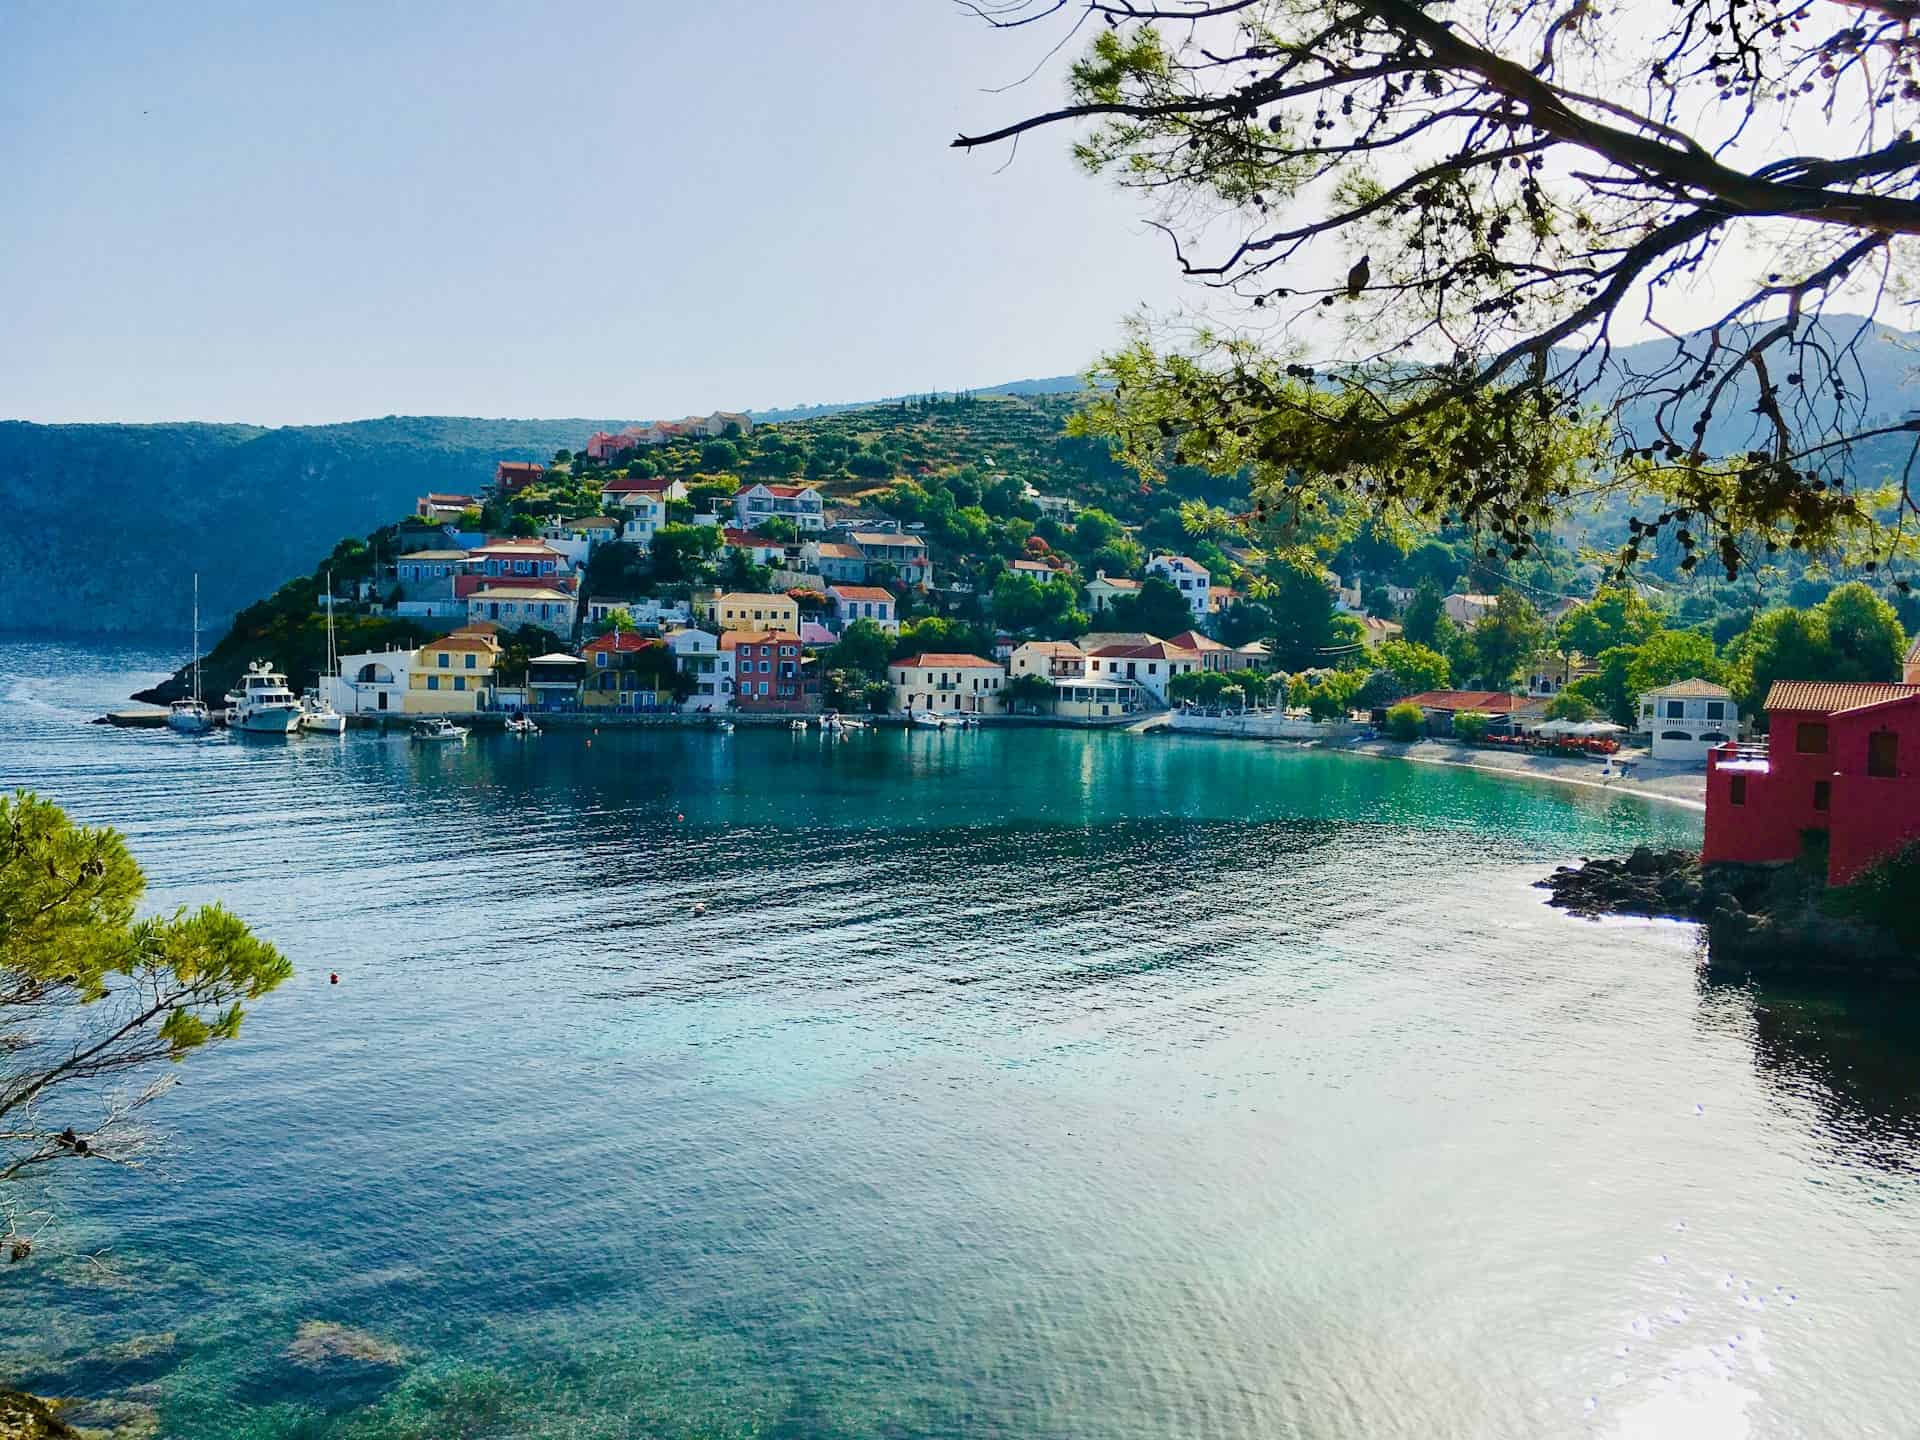 Where to stay in Kefalonia